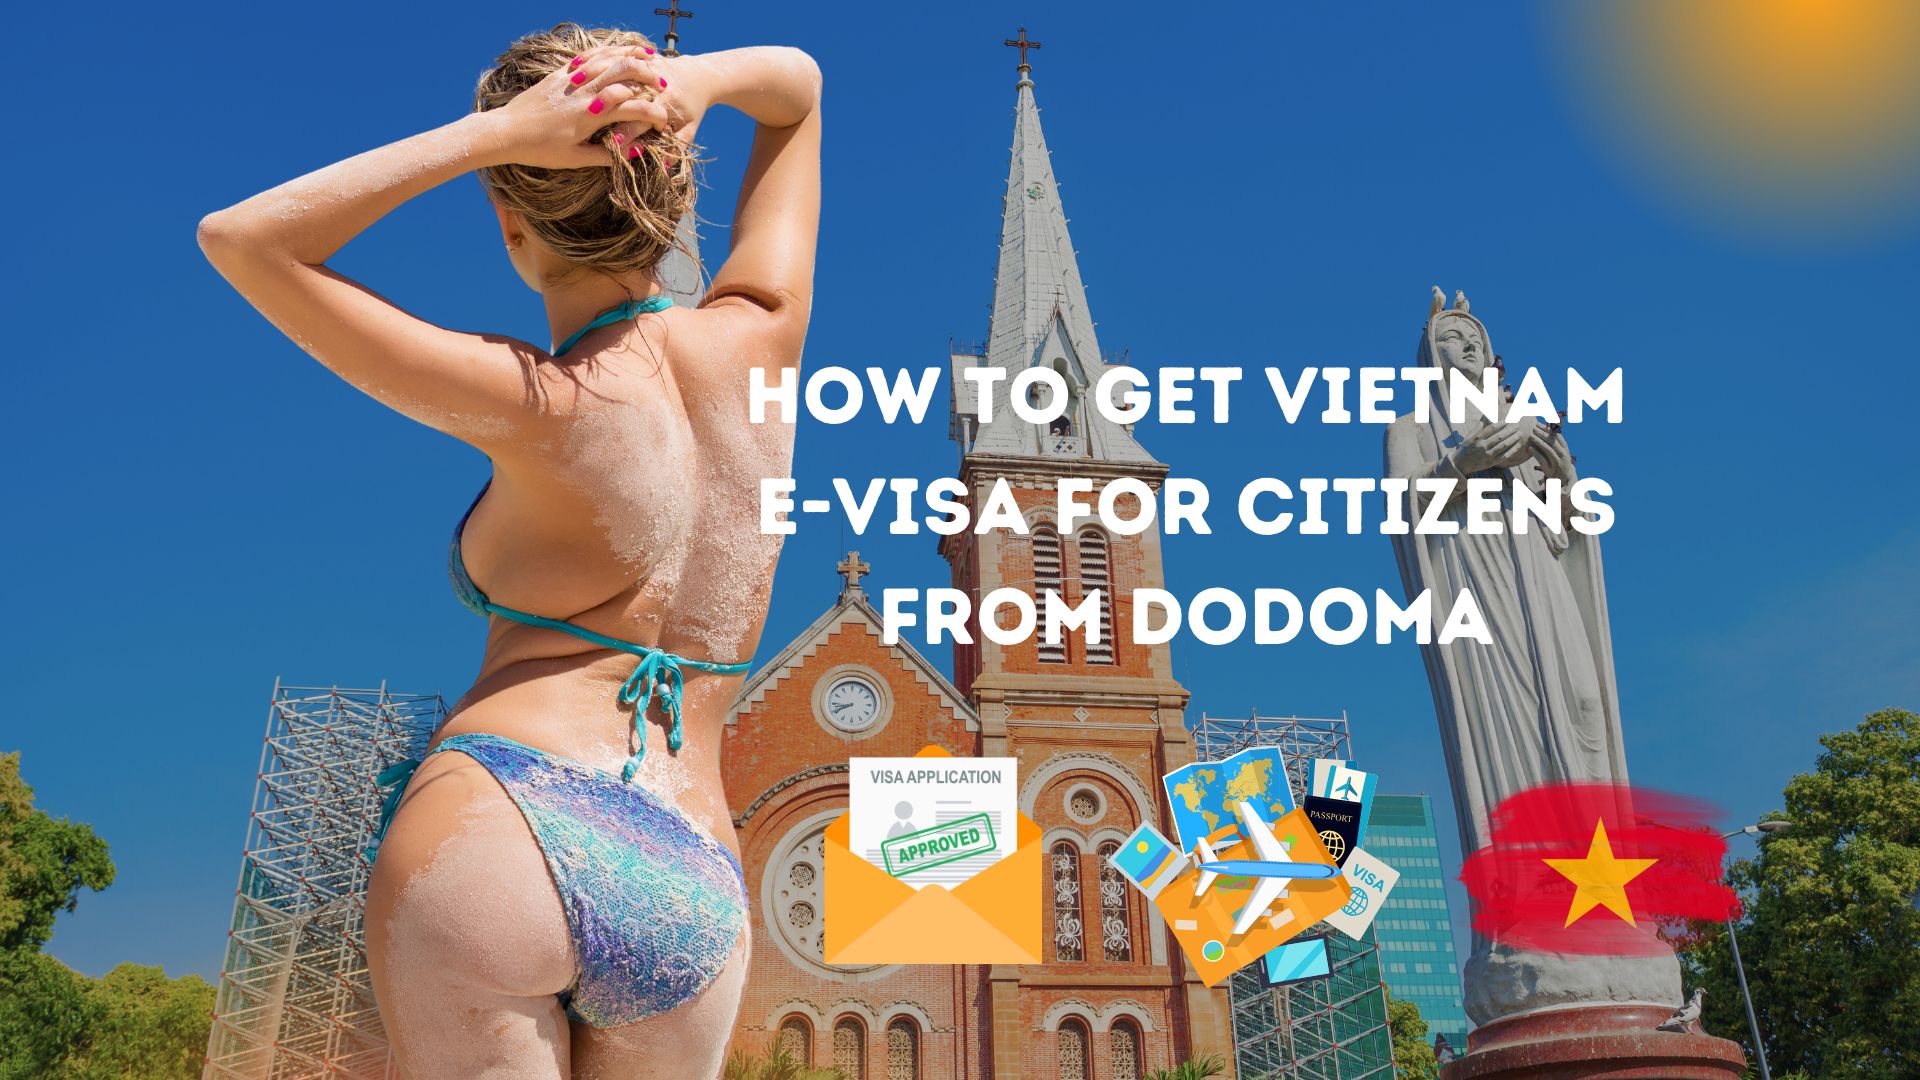 Vietnam Evisa for Citizens from Dodoma